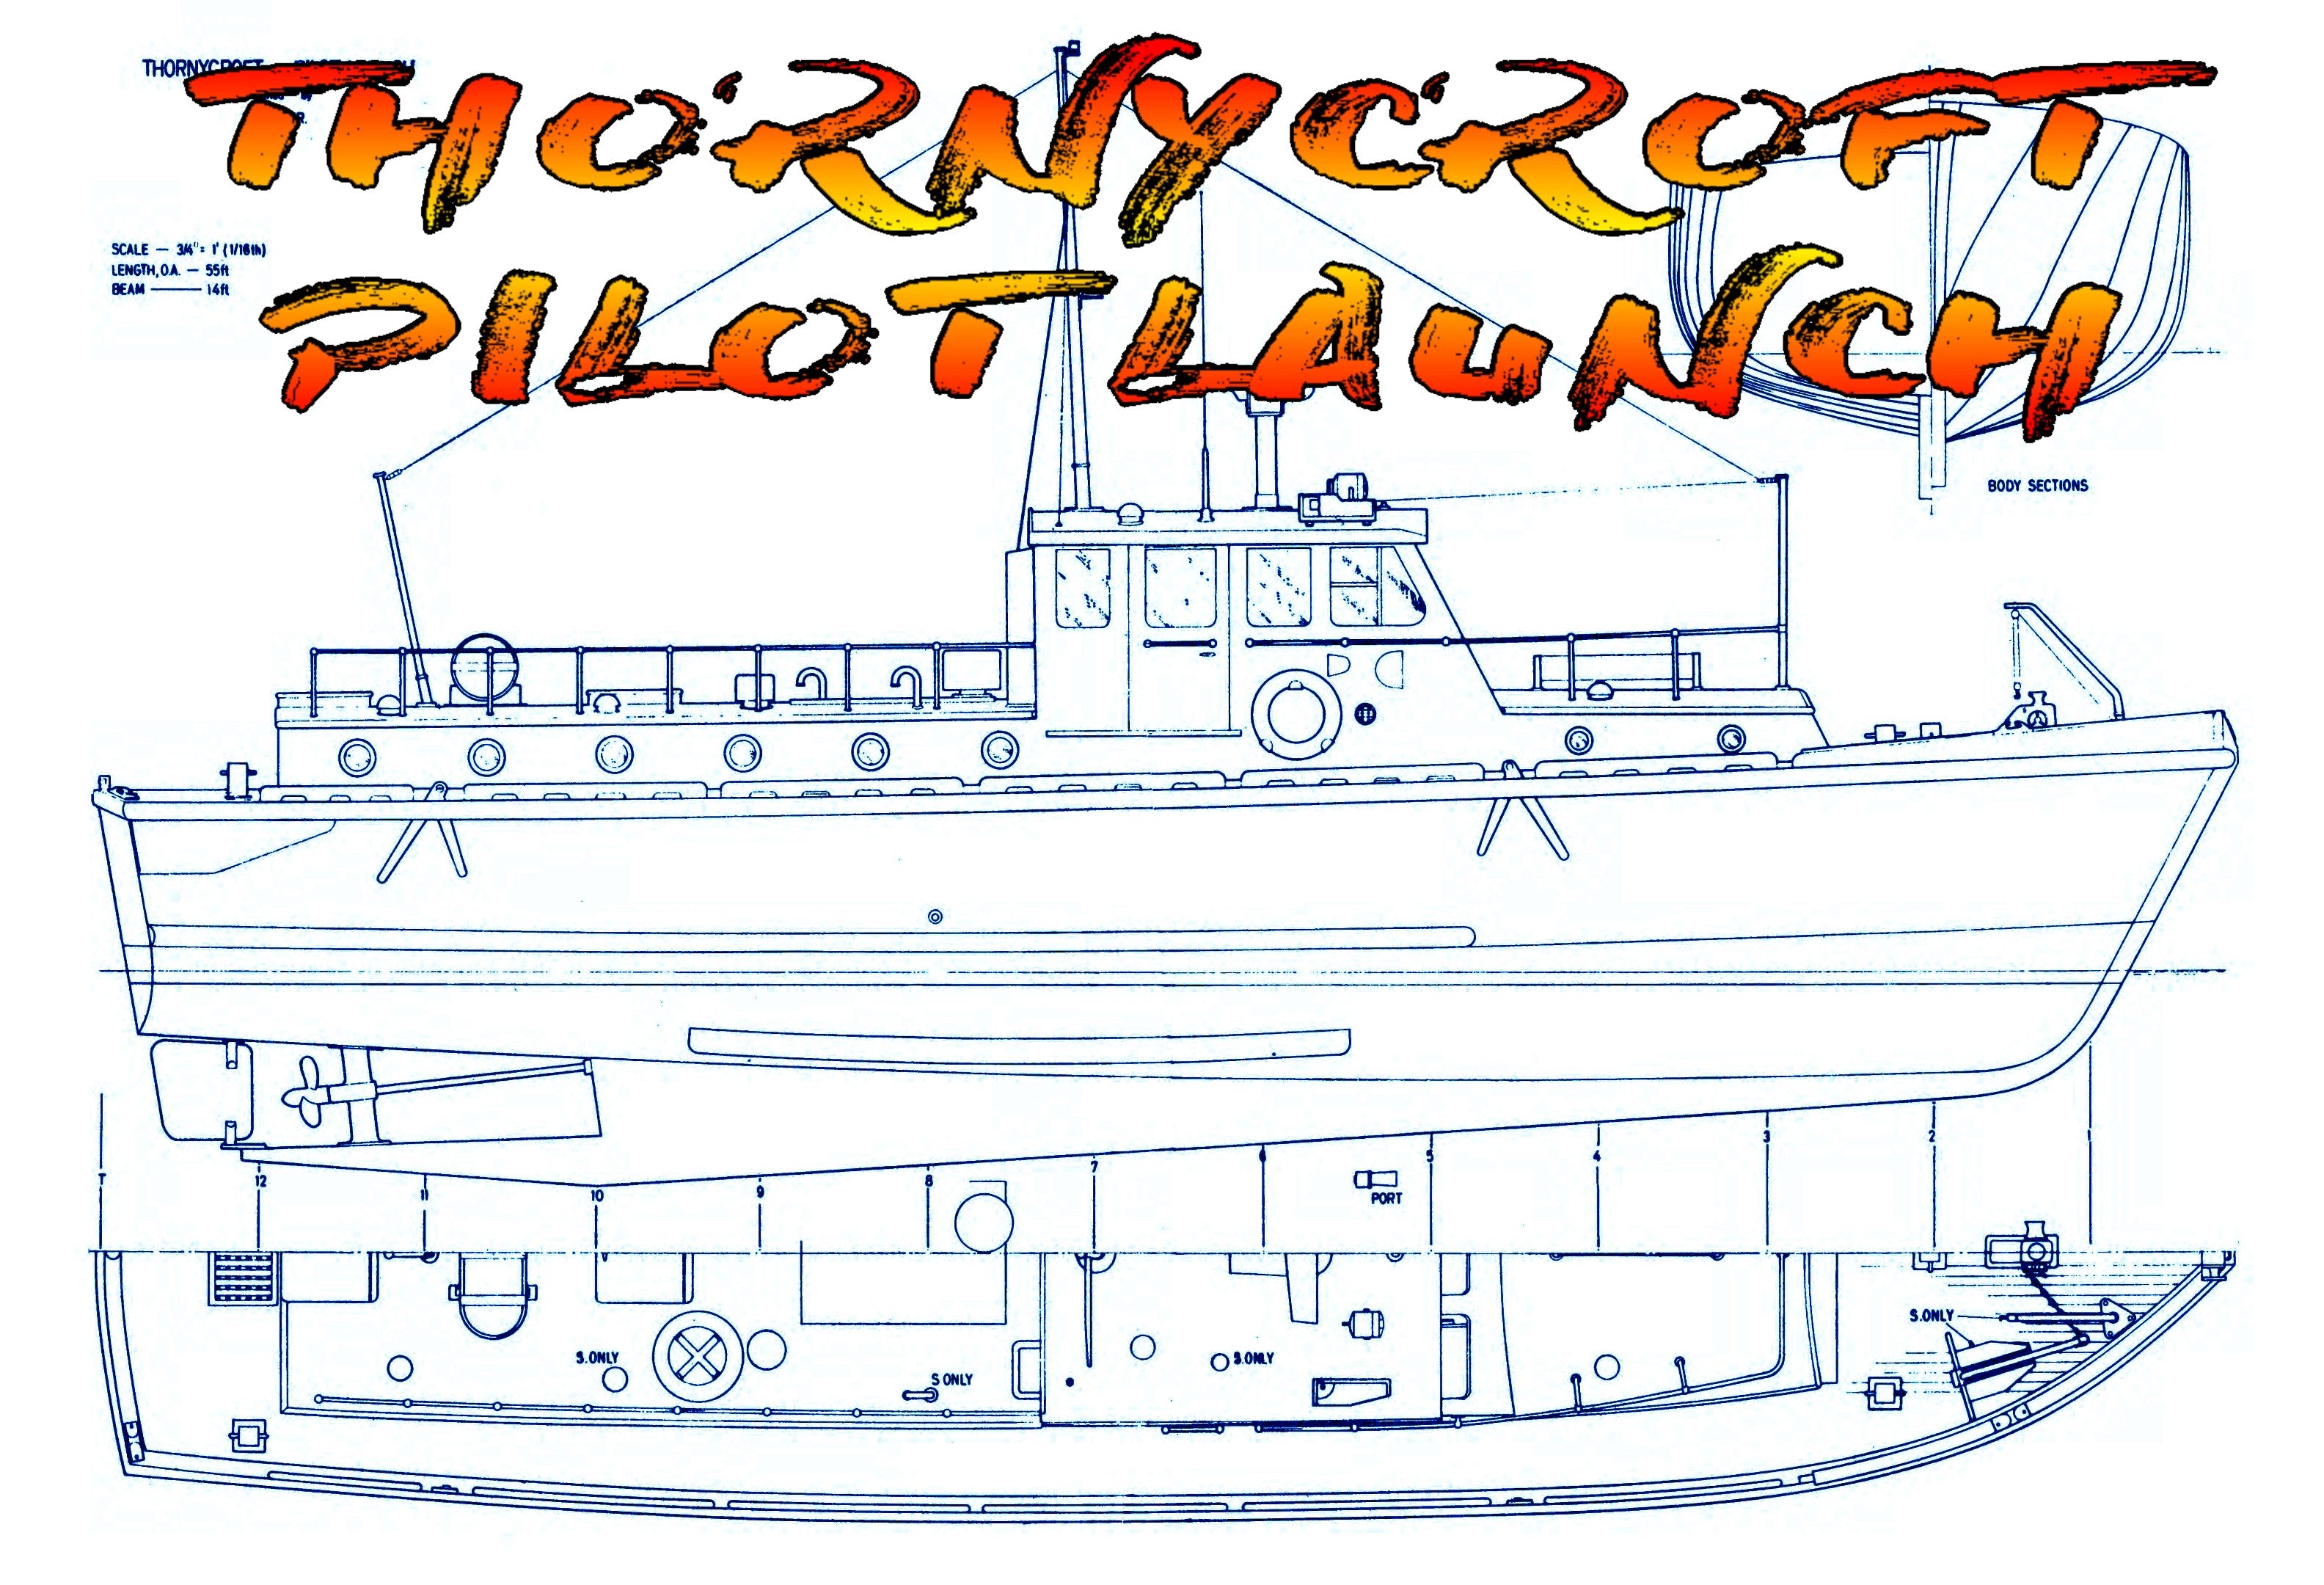 full size printed plan scale 1:16 thornycroft pilot launch suitable for radio control